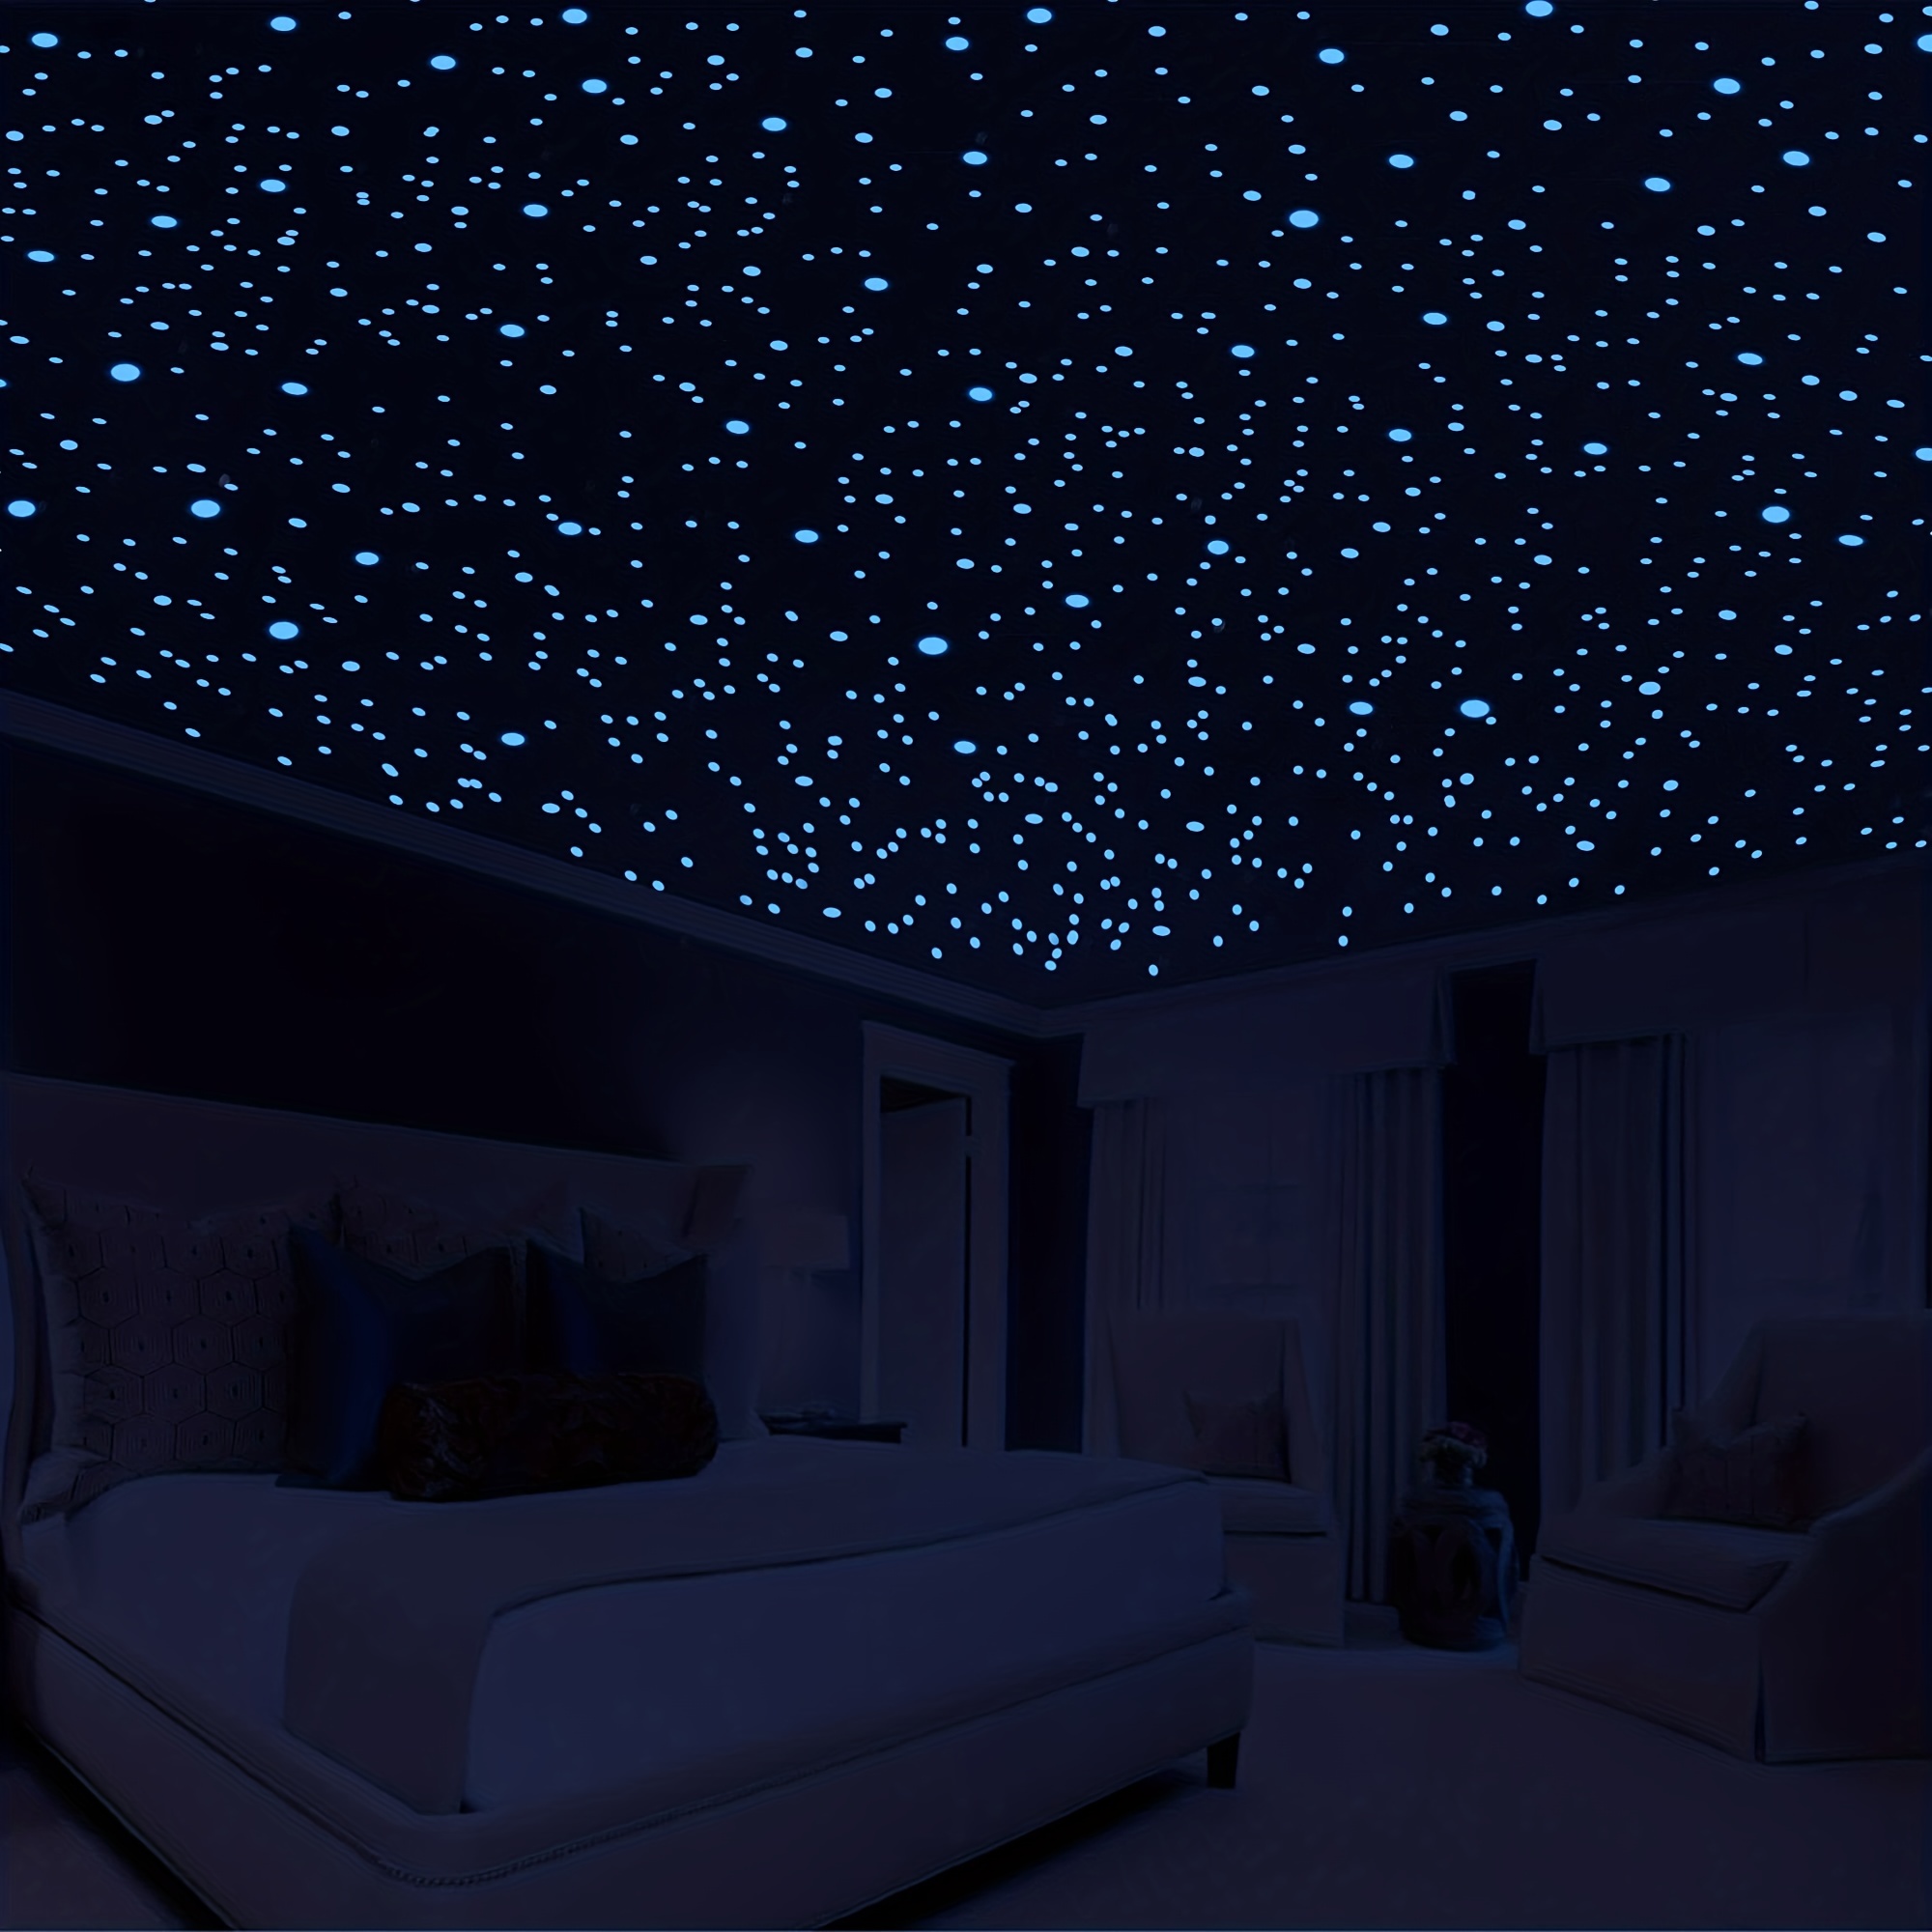 Glow in The Dark Stars - Glow Stars Stickers for Ceiling Self Adhesive 3D Glowing Stars and Moon for Starry Sky Wall Decals for Kids Rooms Wall